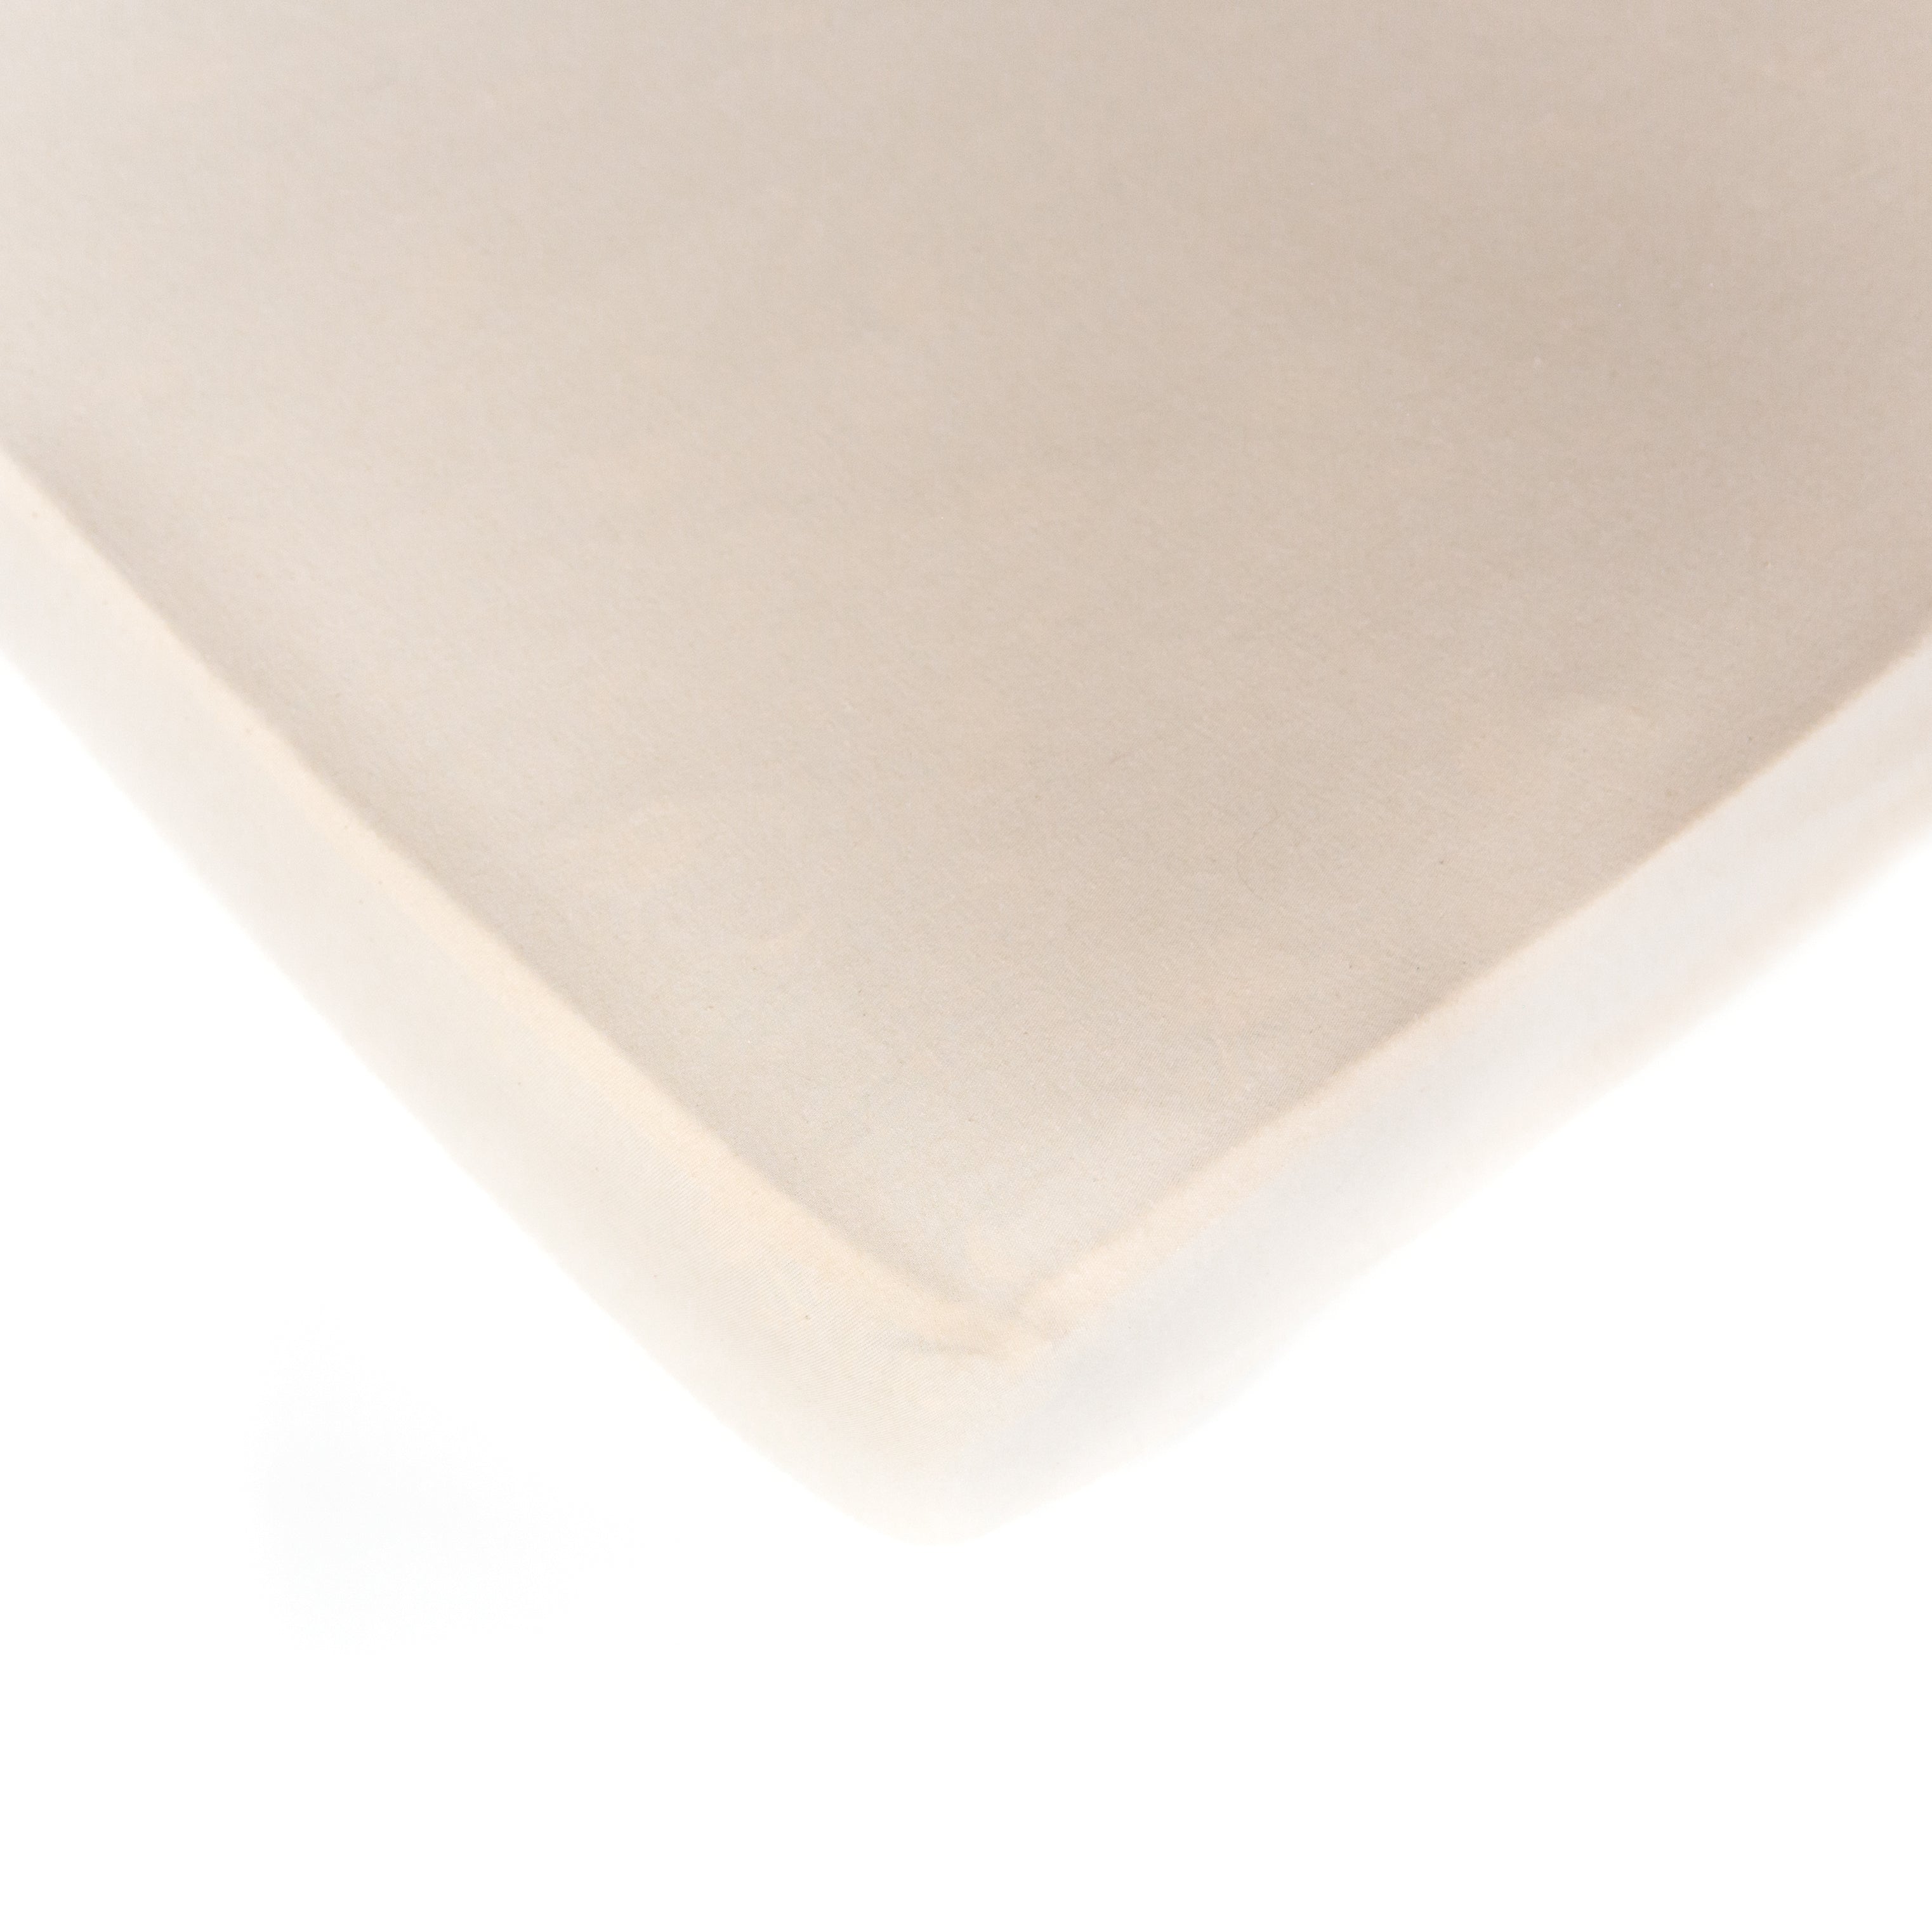 A natural, interlock jersey, Oolie organic cotton crib sheet, unprinted, revealing its natural, undyed, unbleached color.